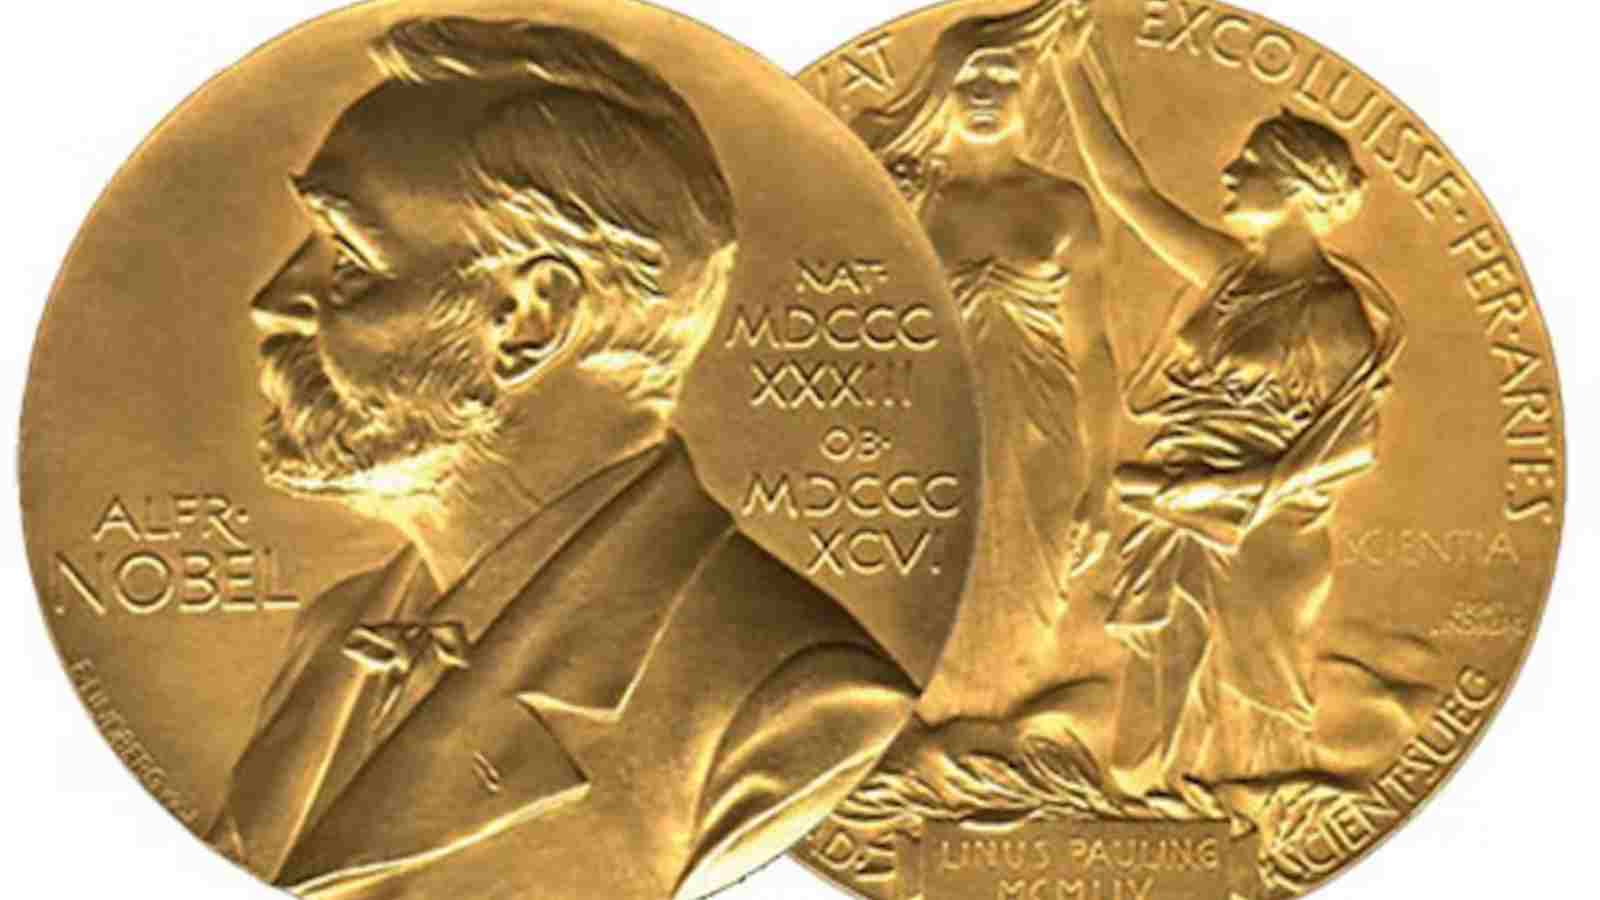 How Much Do Nobel Prize Winners Receive? Where Does The Money Come From